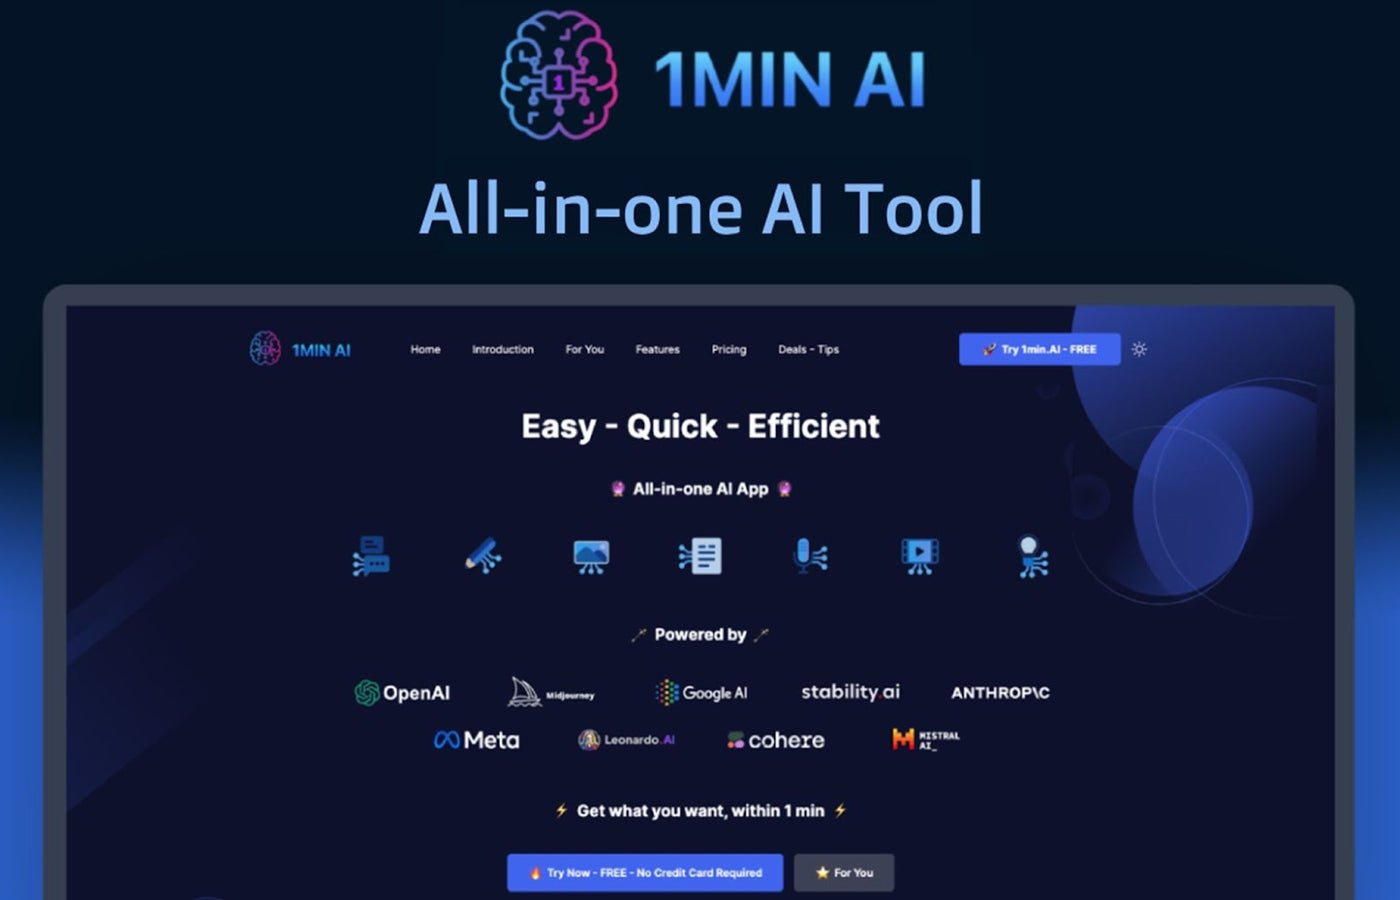 This $40 Subscription Will Bring AI Into Your Business